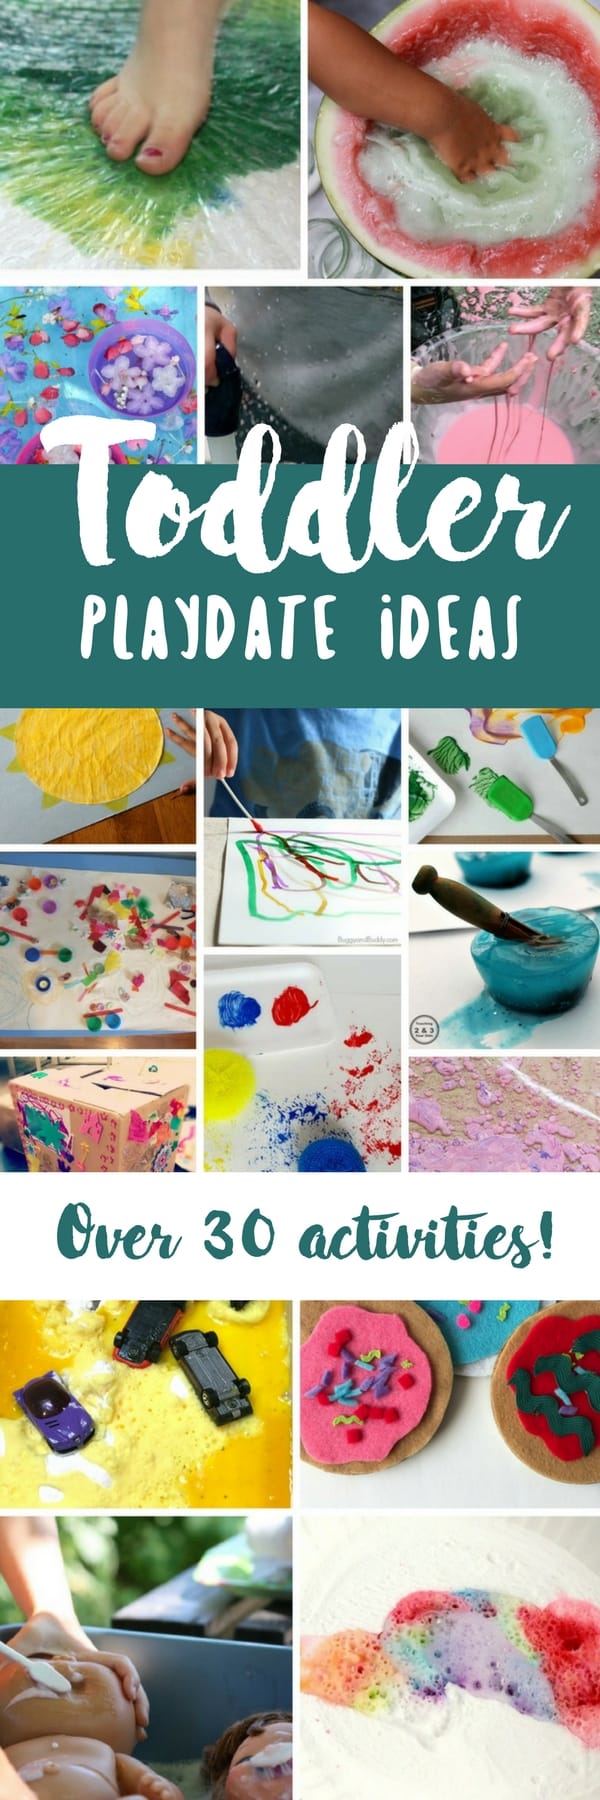 These toddler playdate ideas are perfect for fun and social skill building for 1 and 2 year olds.